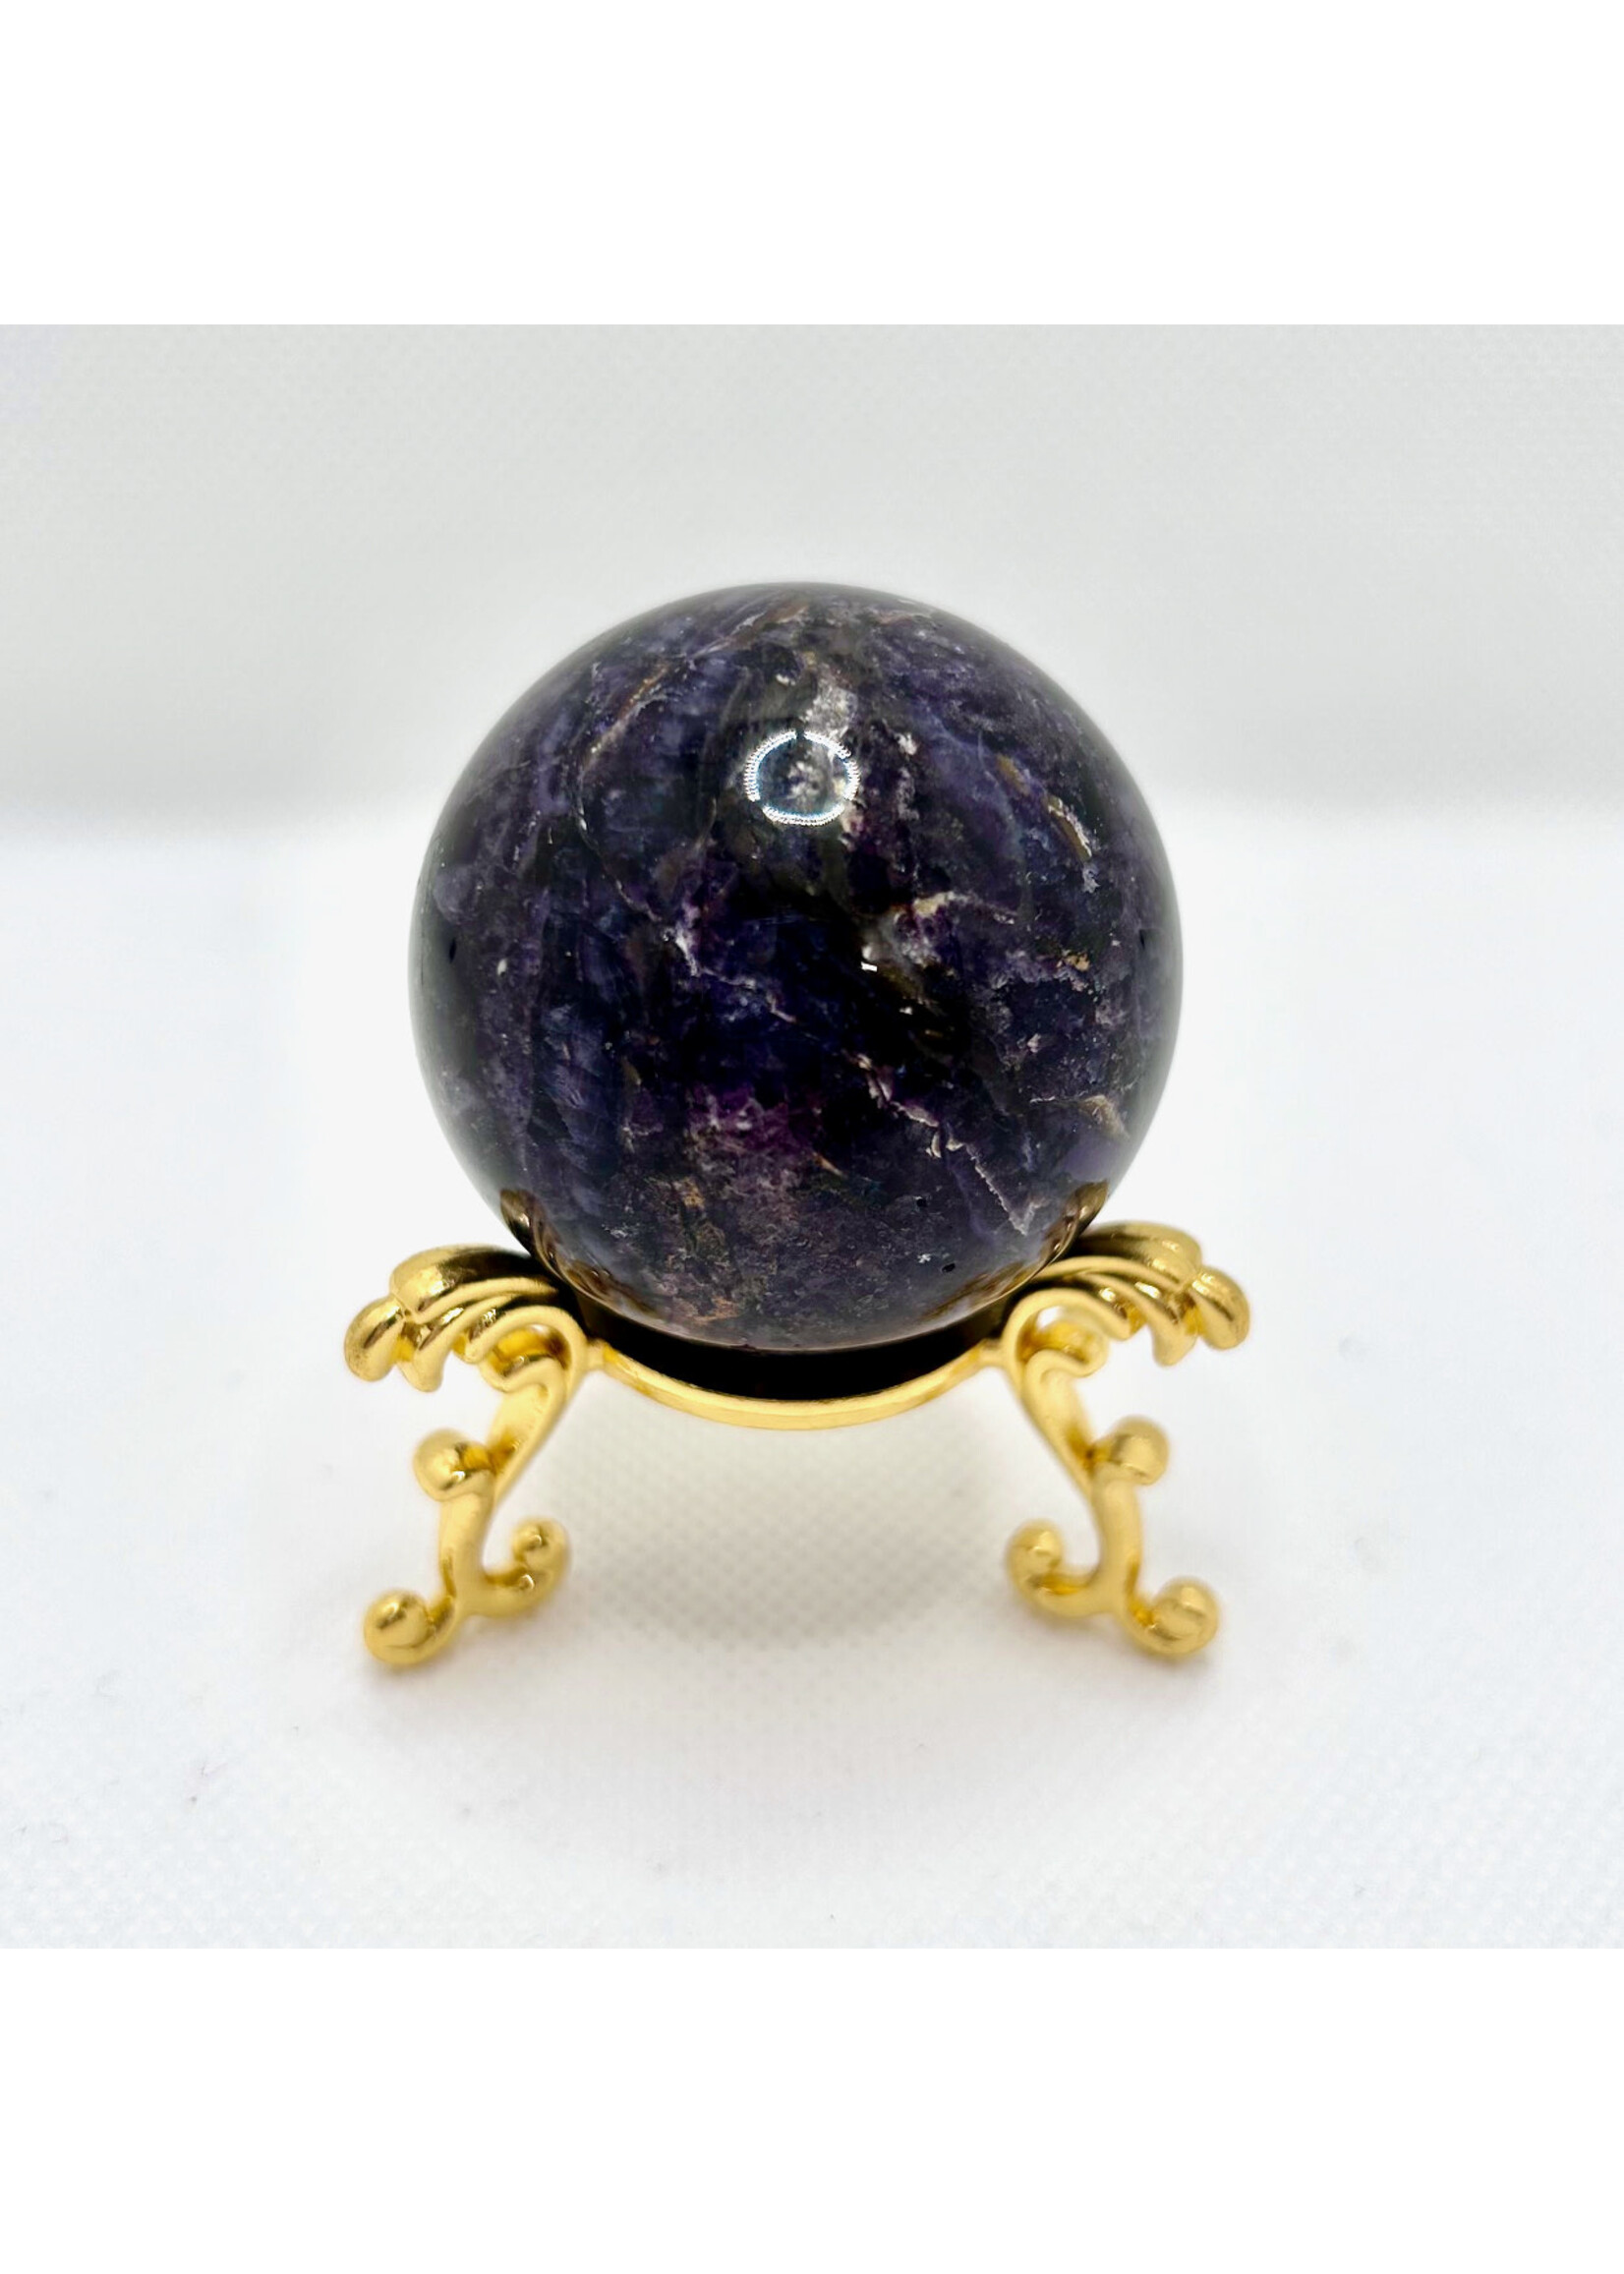 Purple Opaline Fluorite (Tiffany Stone) Spheres for passion and desire